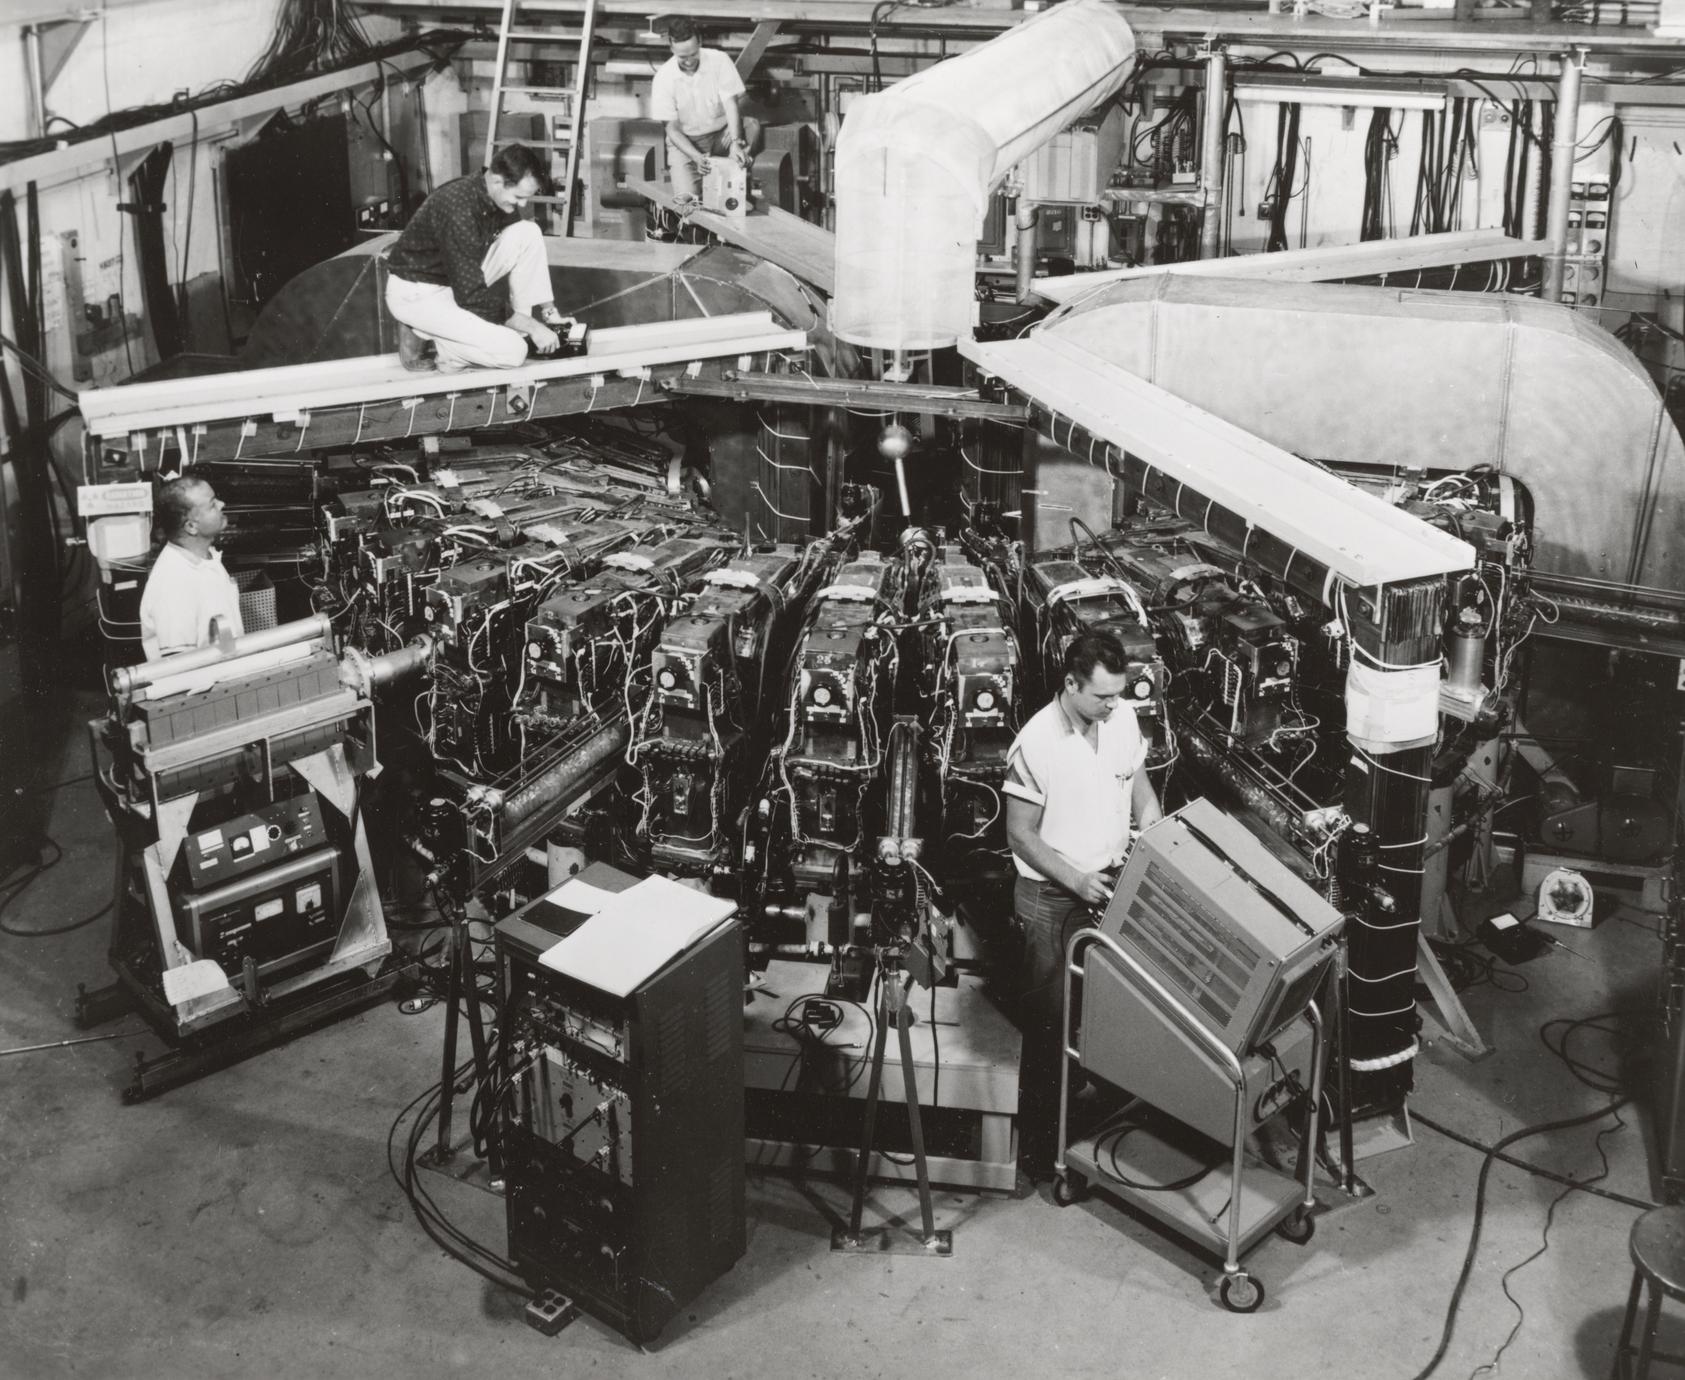 MURA researchers working on the 50MeV machine